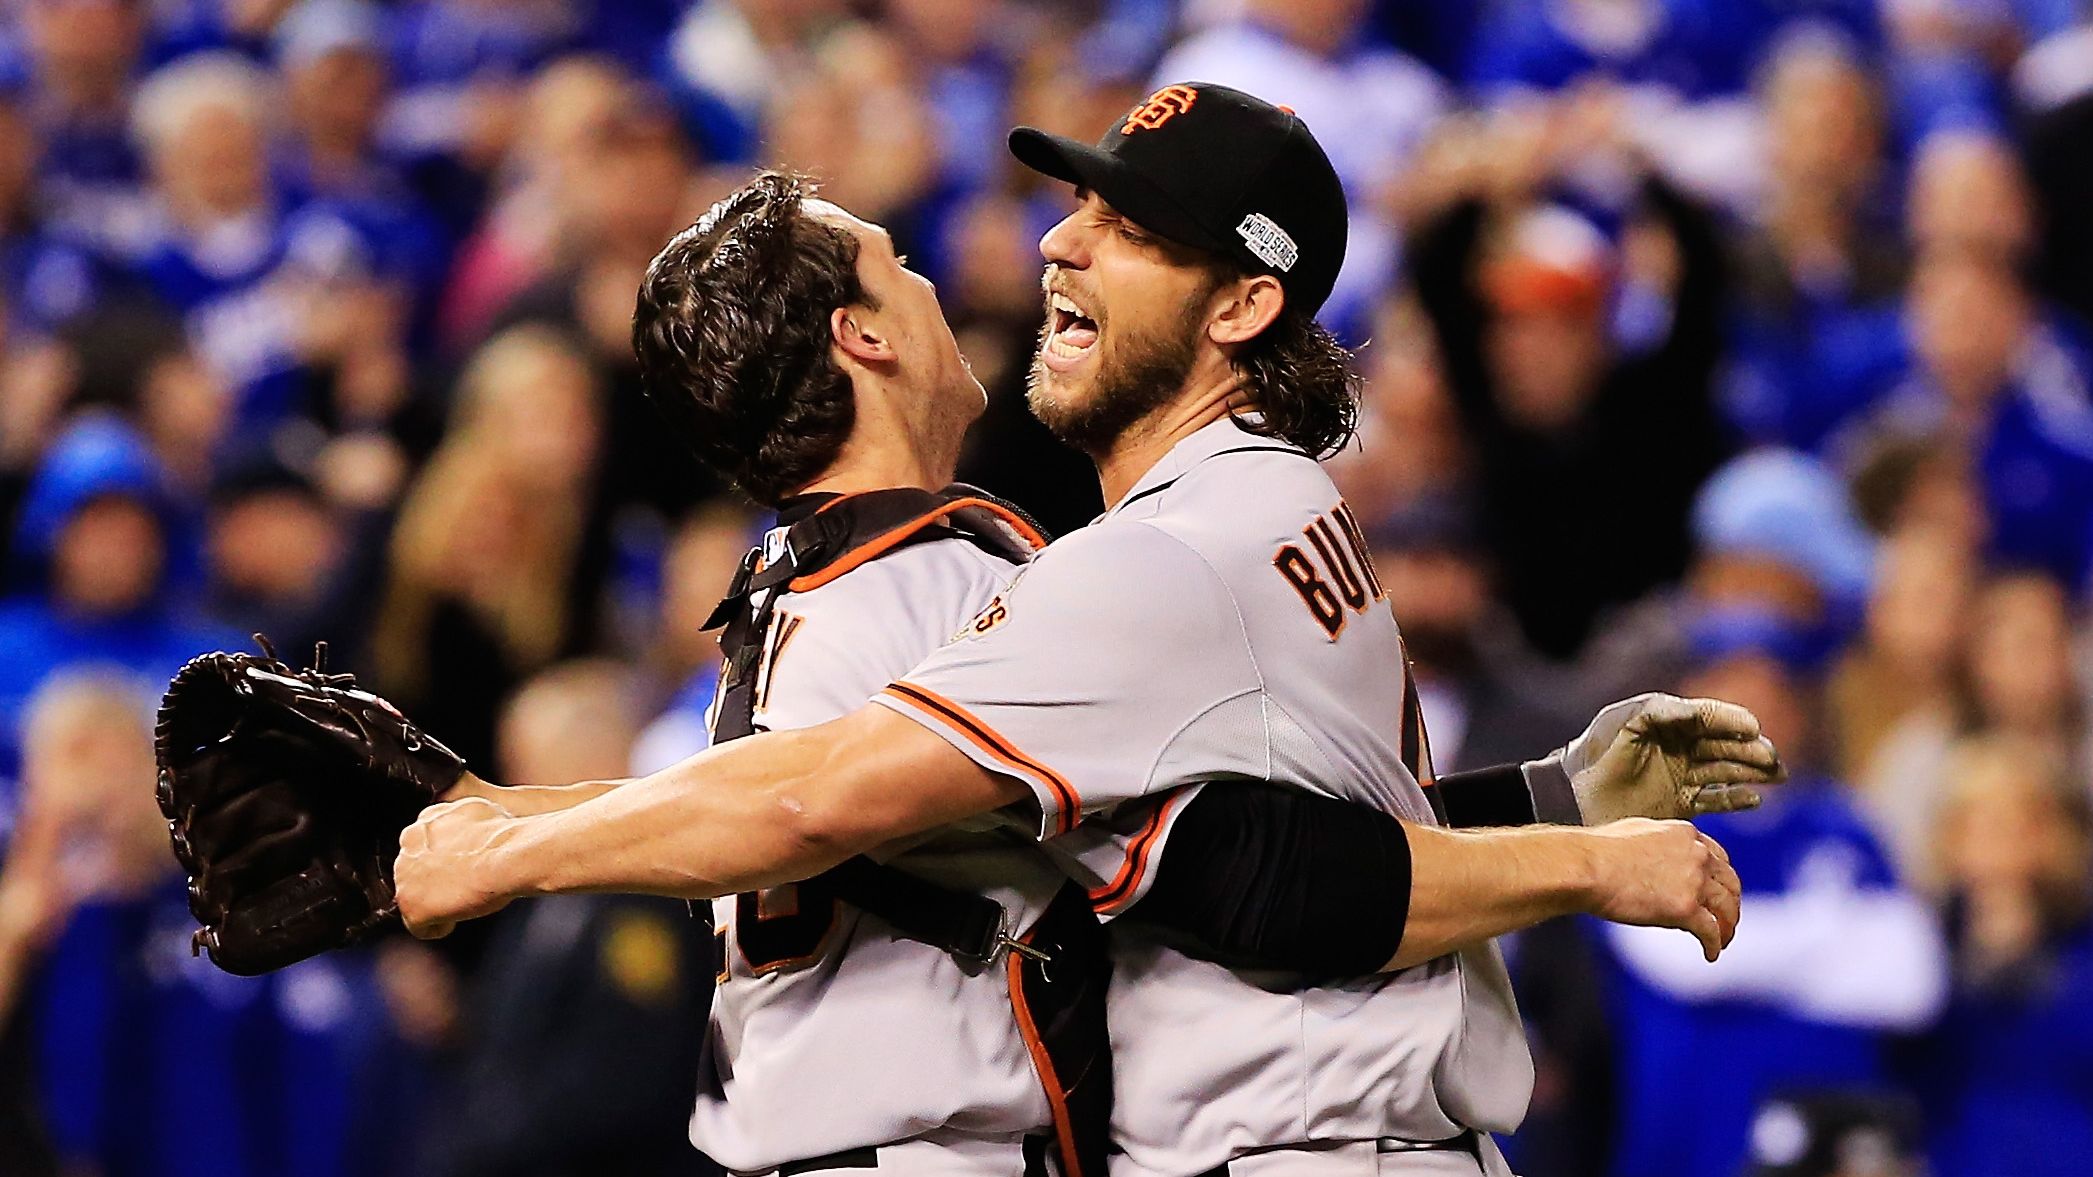 Madison Bumgarner reveals he's been competing in rodeos under the